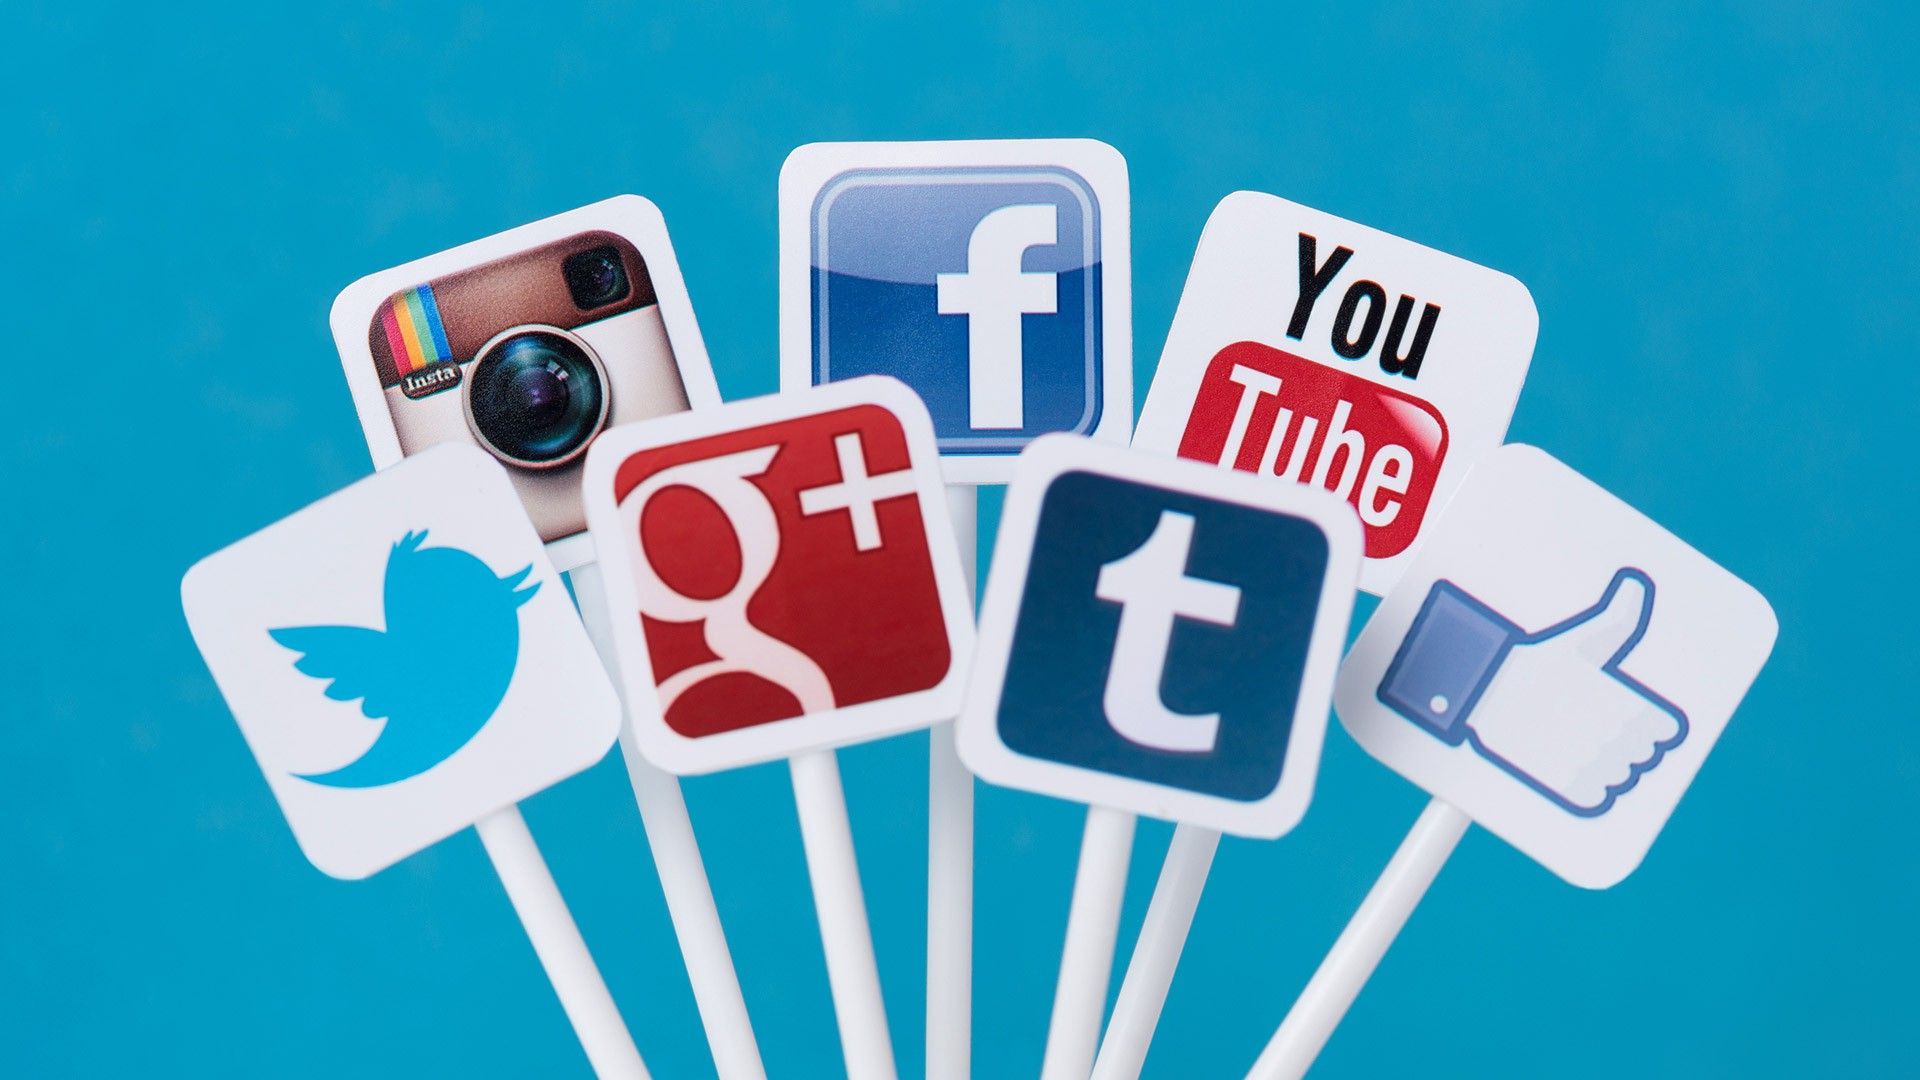 How to get your guests to do social media marketing